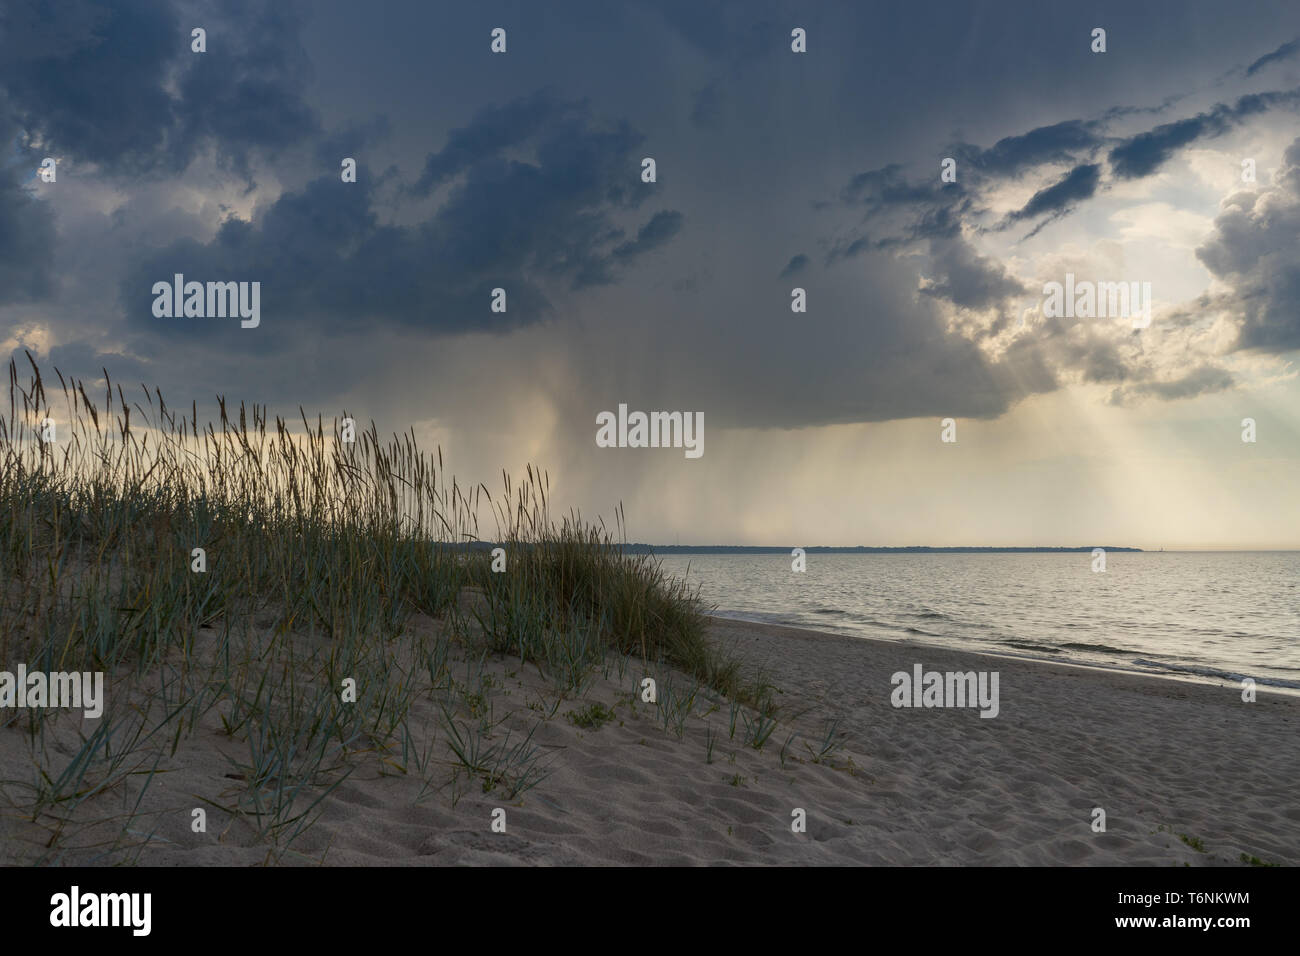 Wild sandy beach against sea and dramatic stormy clouds Stock Photo